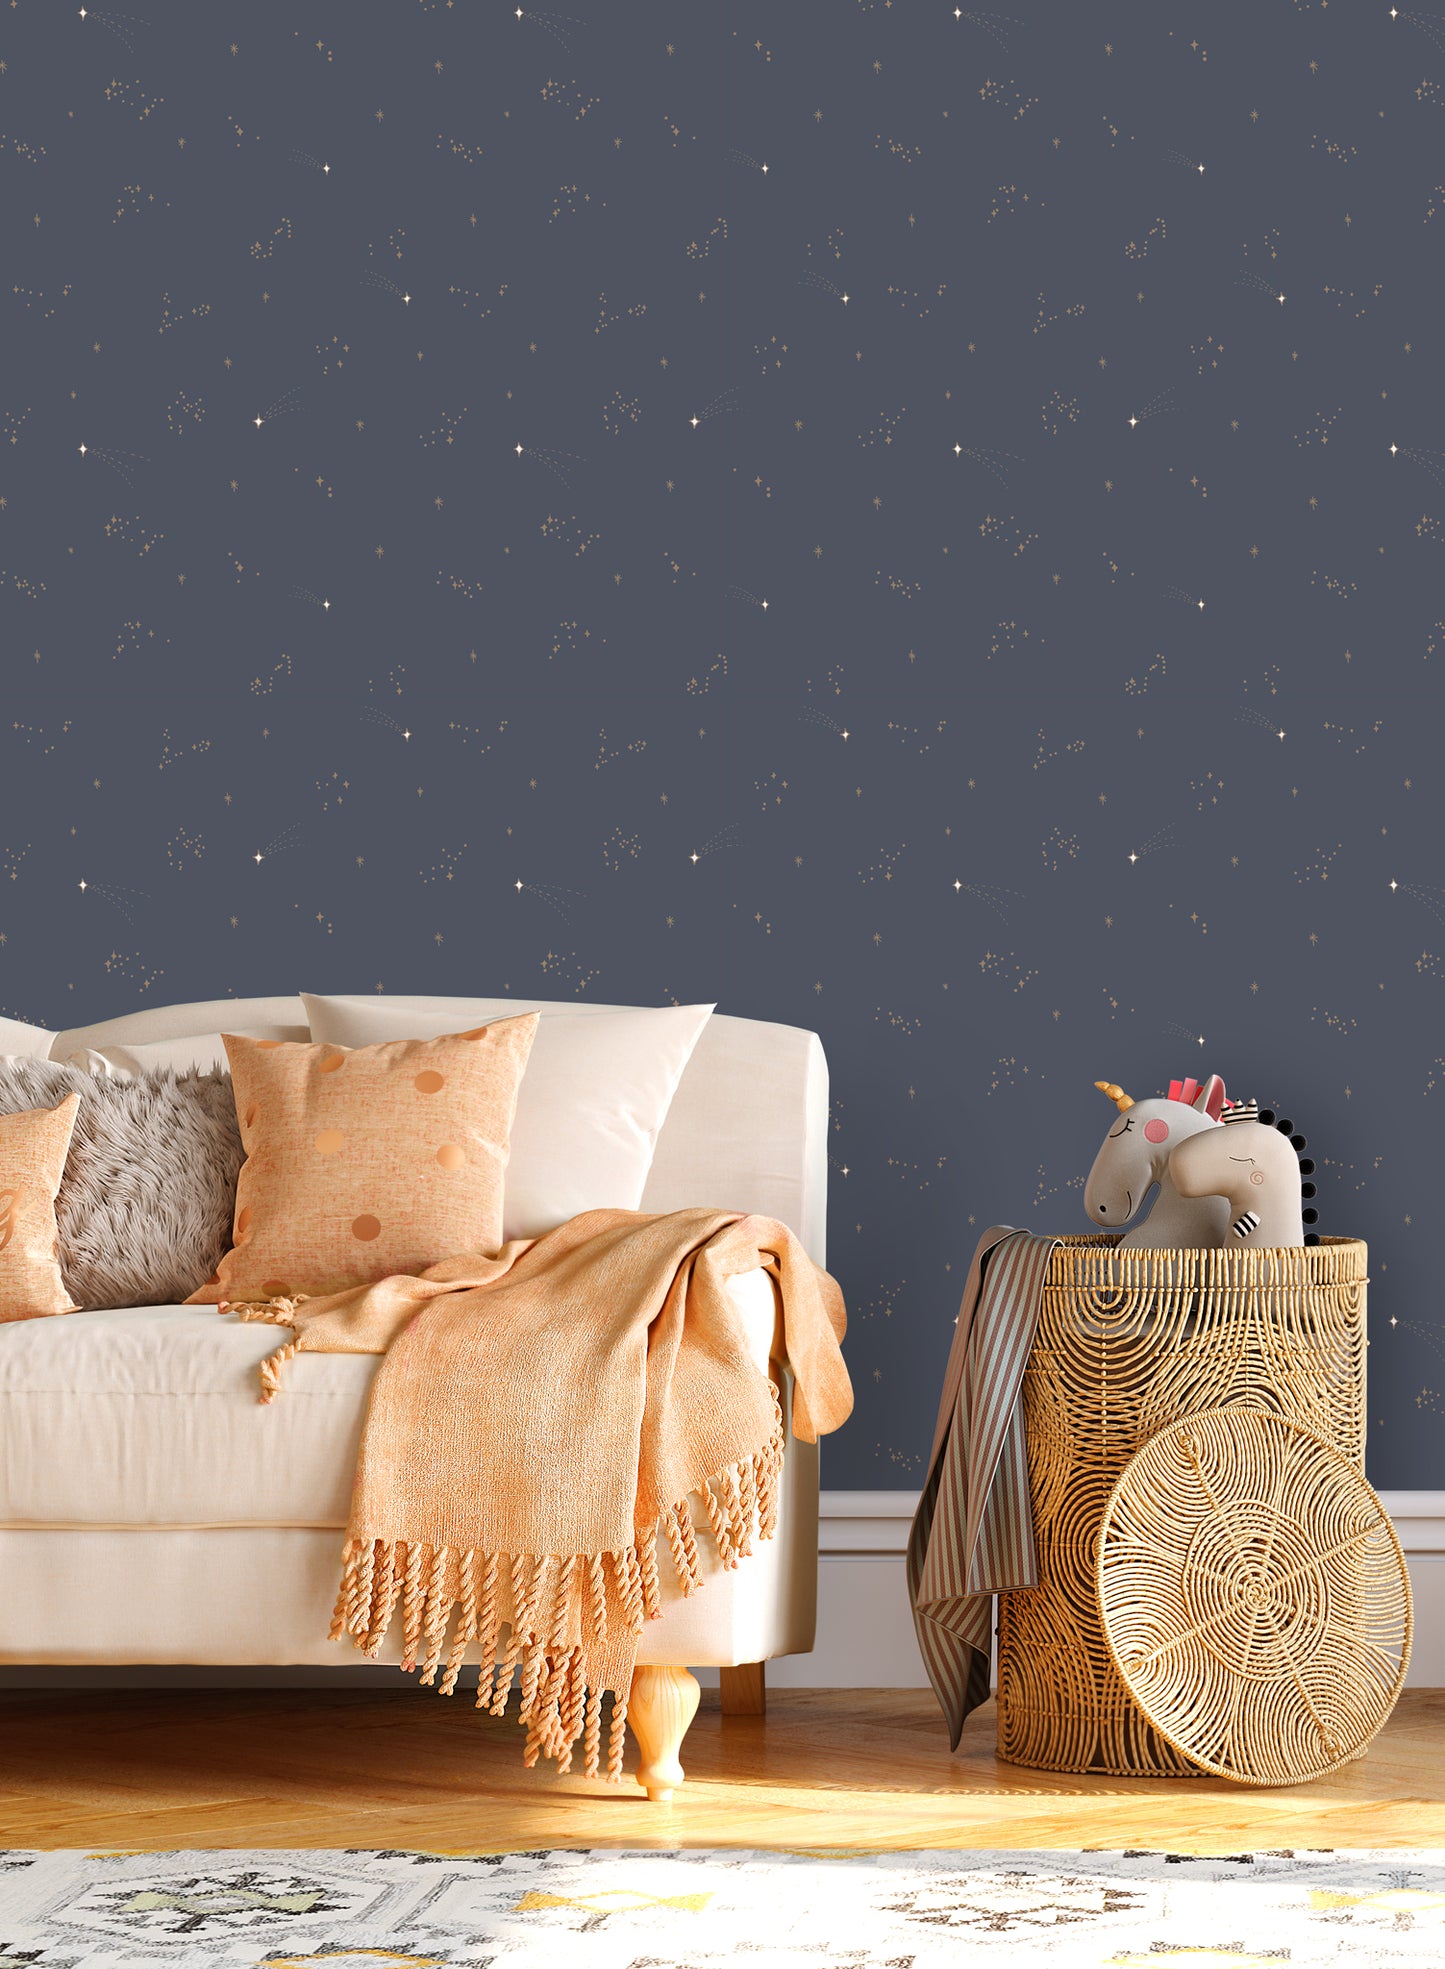 You're a Star Kid is a Minimalist wallpaper by Opposite Wall of a starry sky.